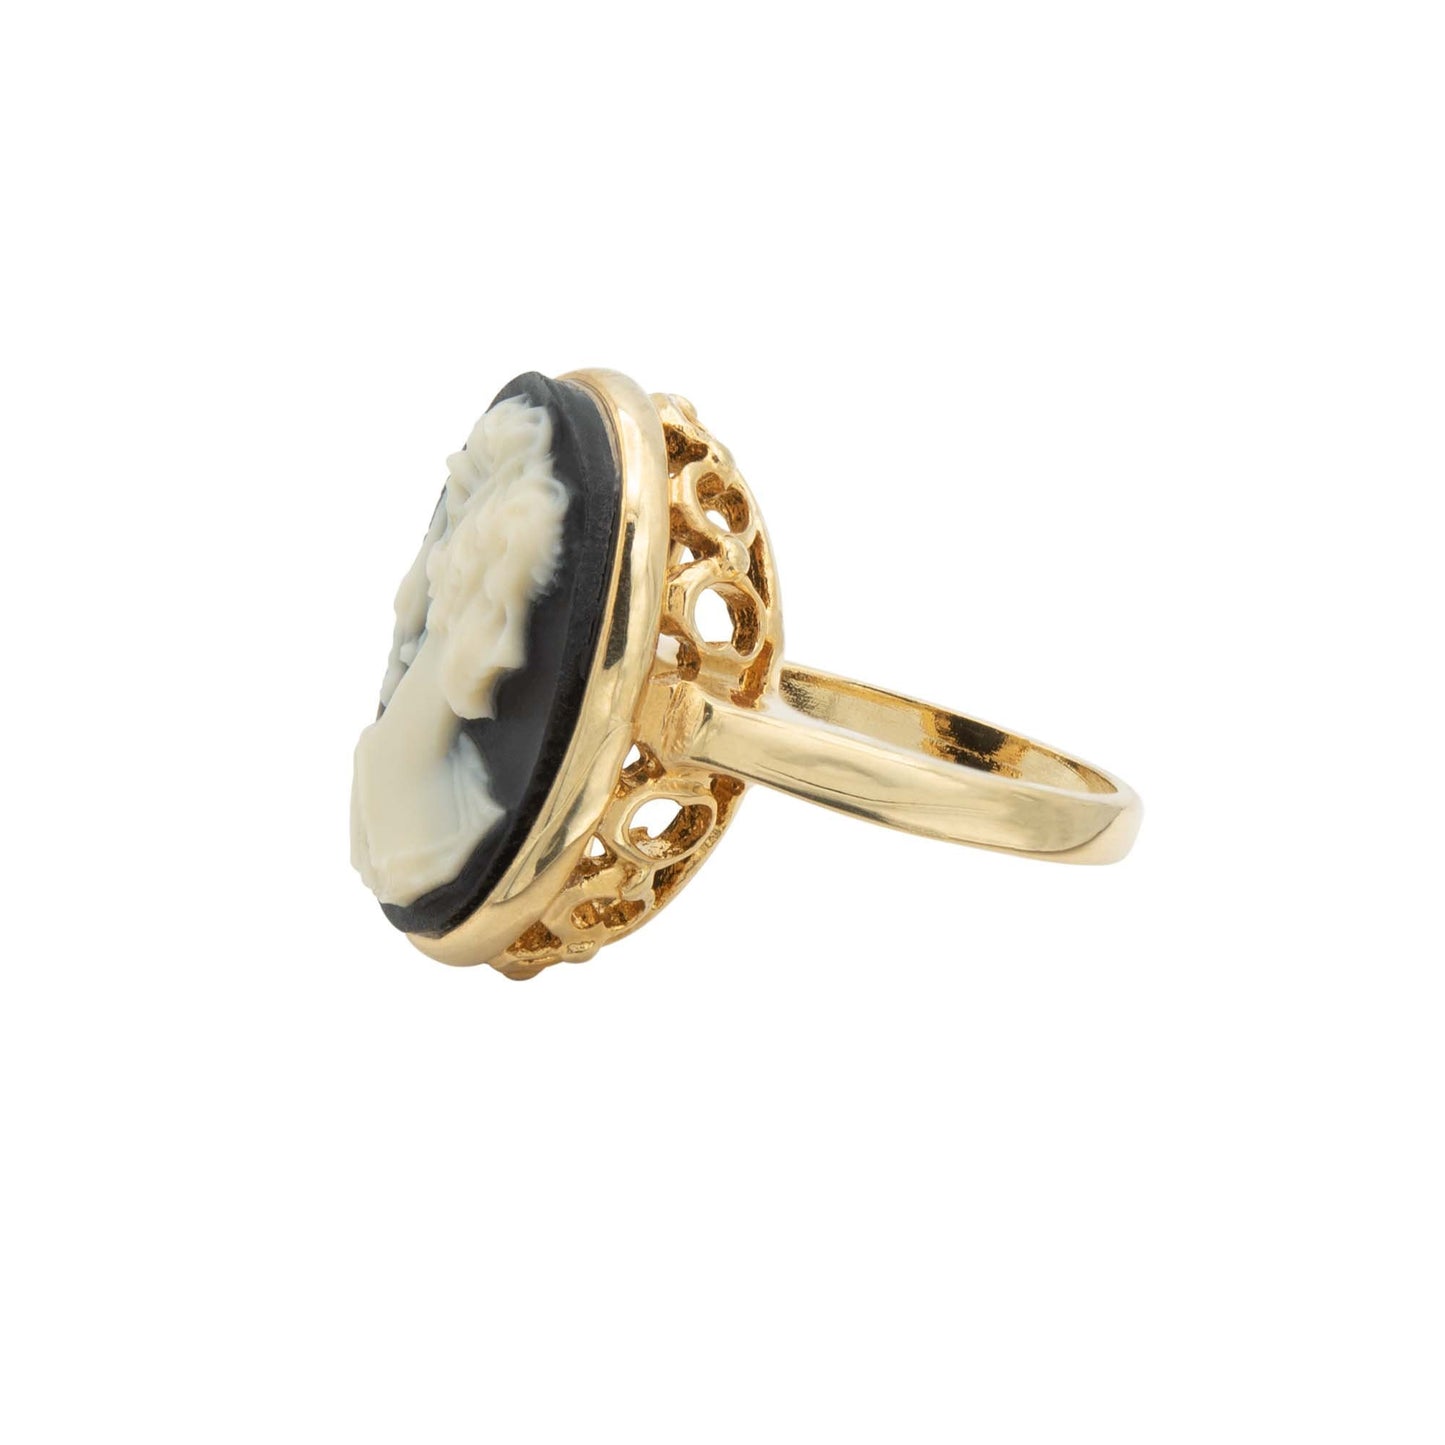 Vintage White Silhouette on Black Cameo Ring Antique 18k Gold Cameo Womans Girls Handmade Jewelry R1776 - Limited Stock - Never Worn